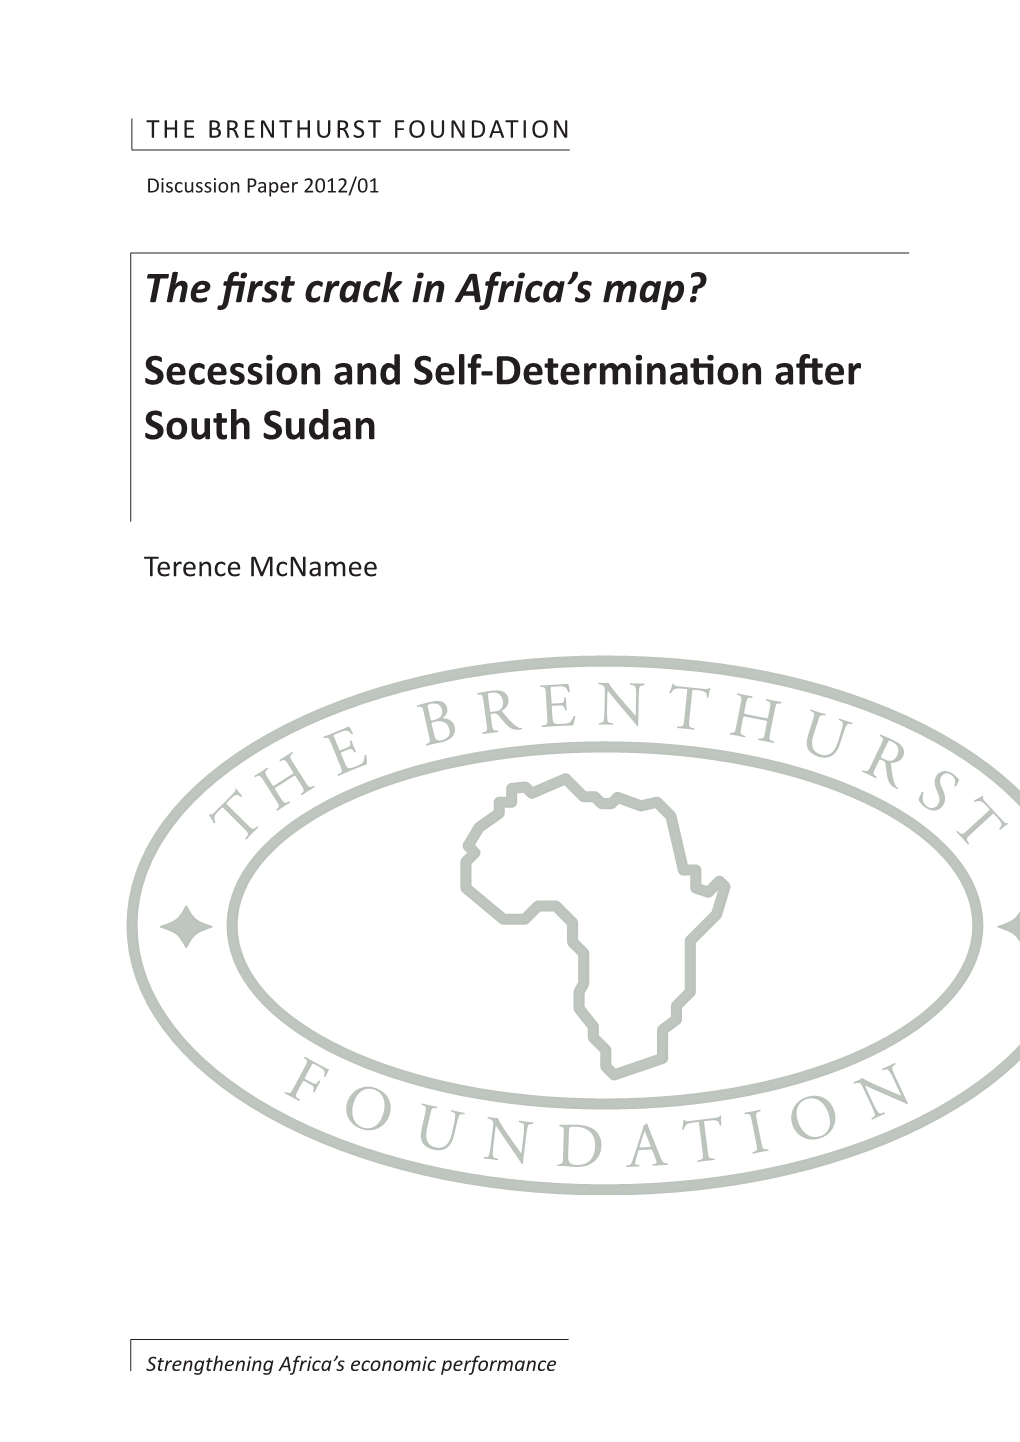 The First Crack in Africa's Map? Secession and Self-Determination